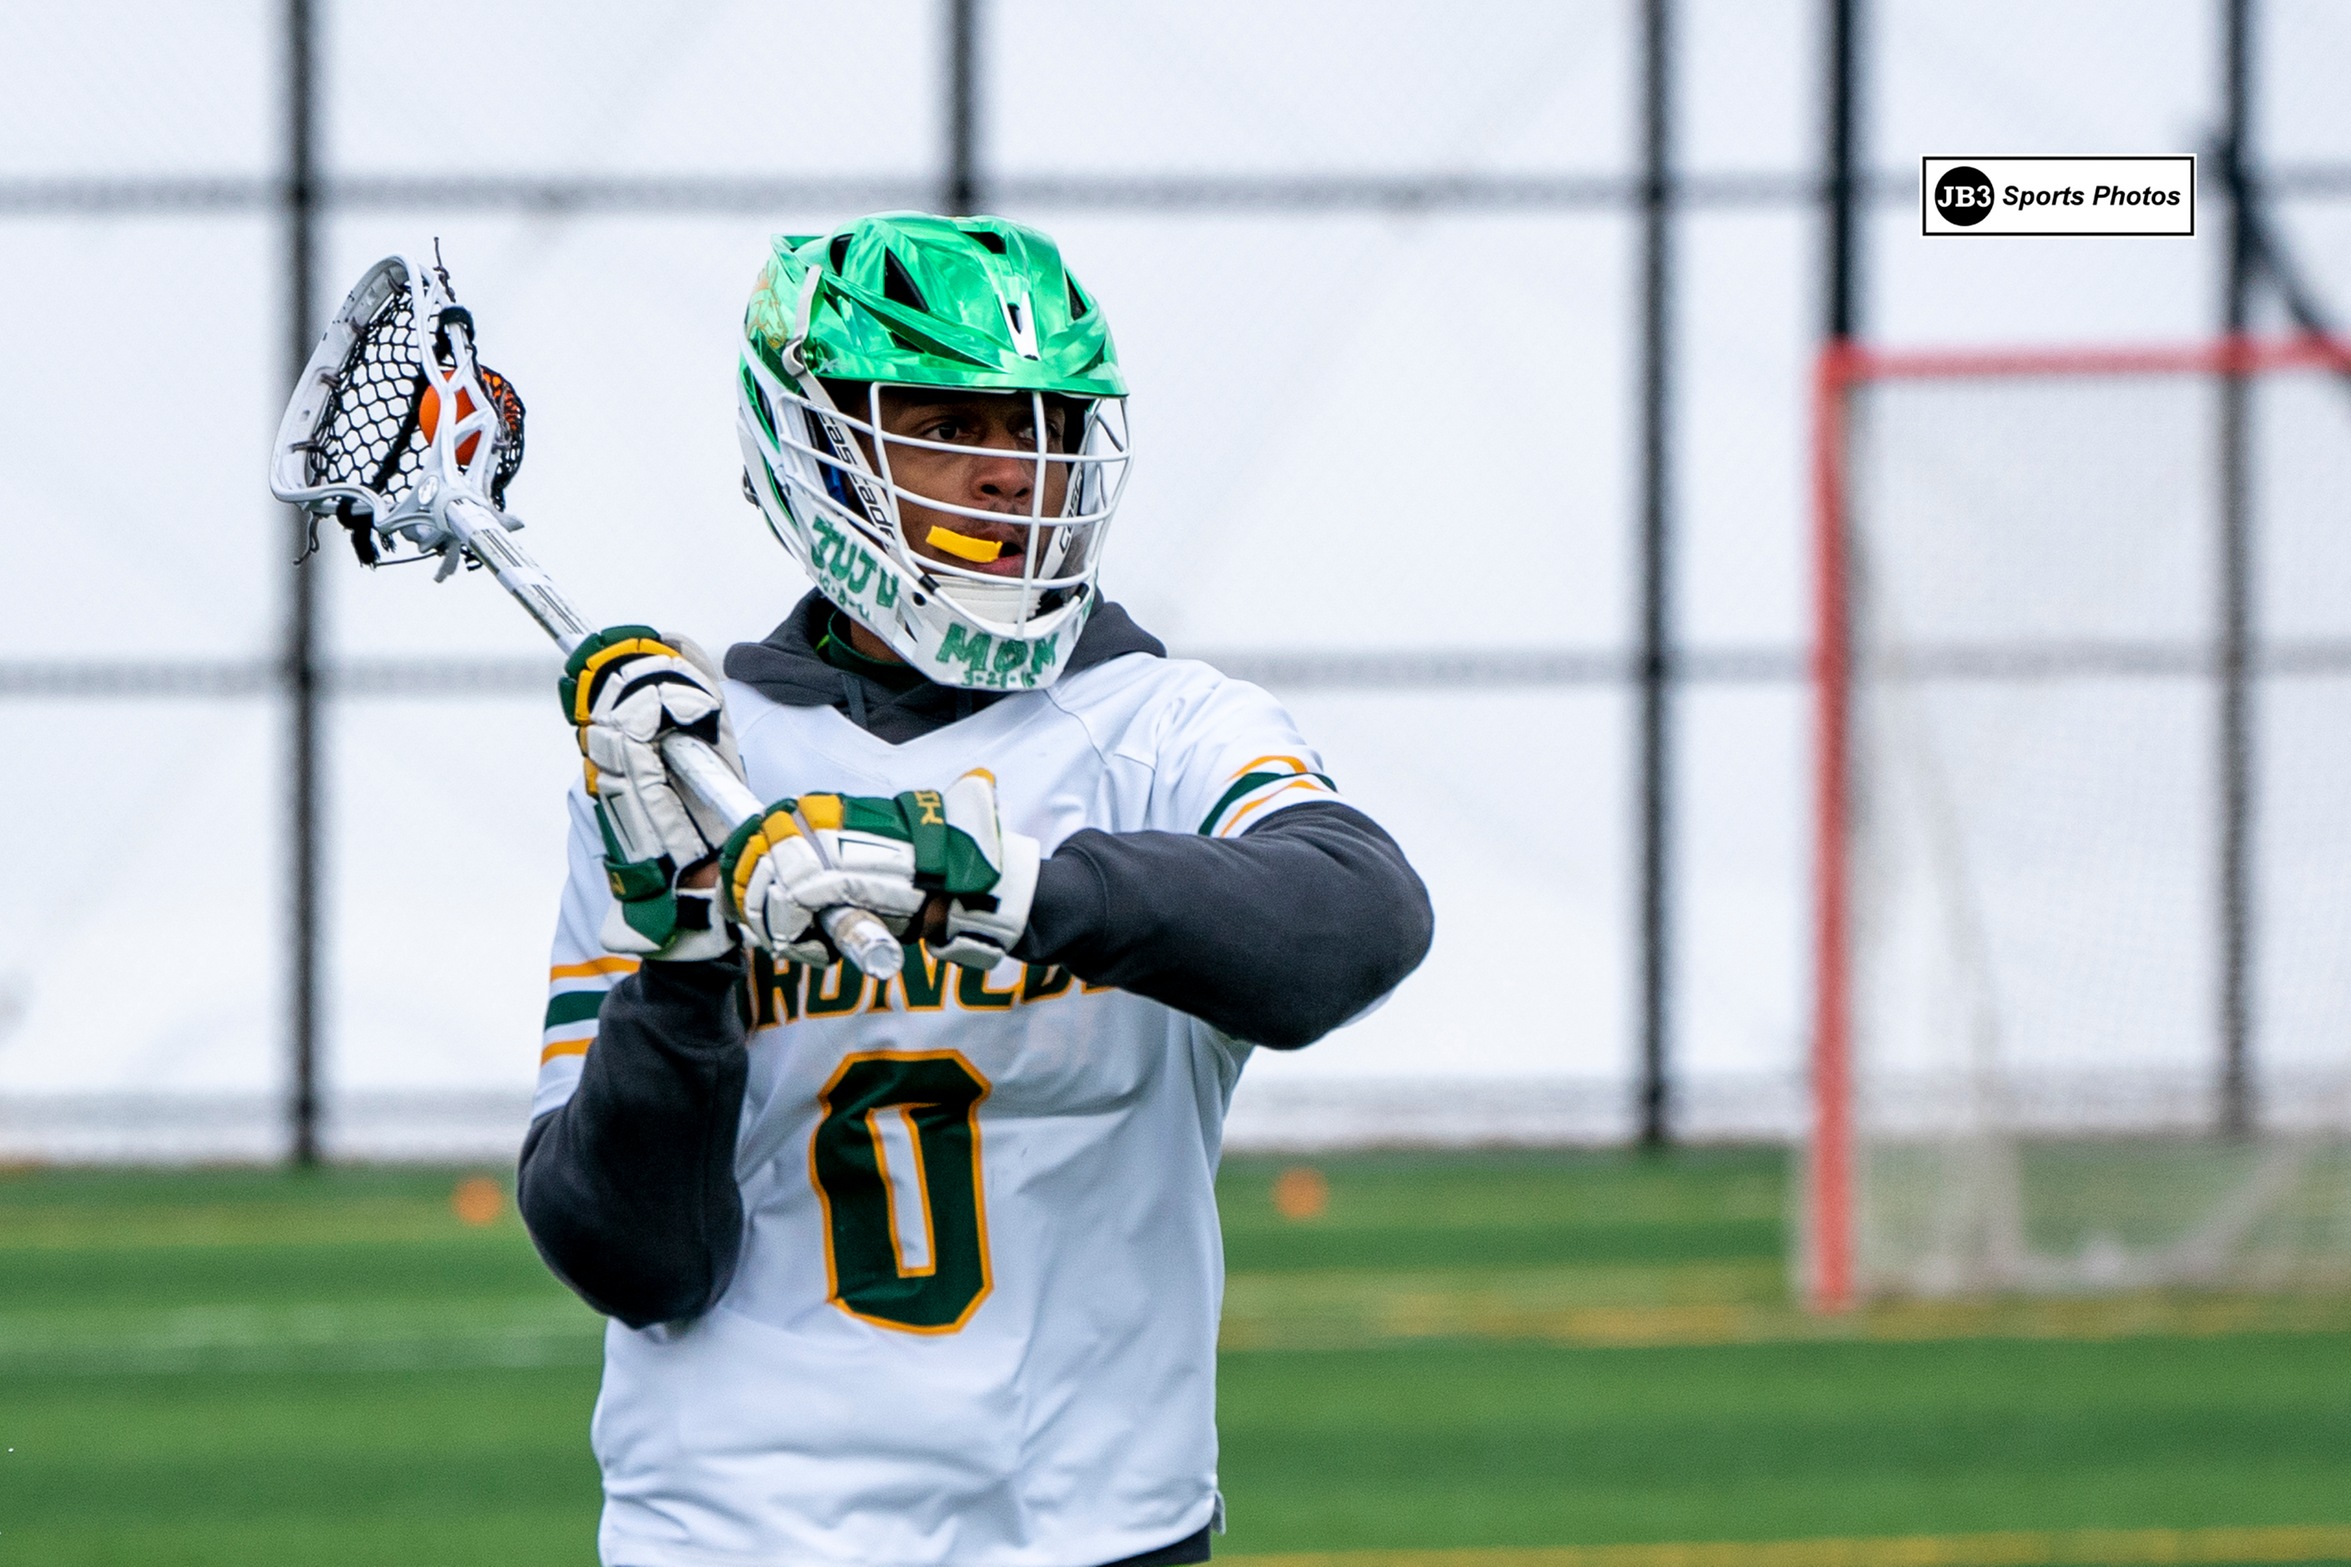 Men's Lacrosse defeated by New Paltz at home